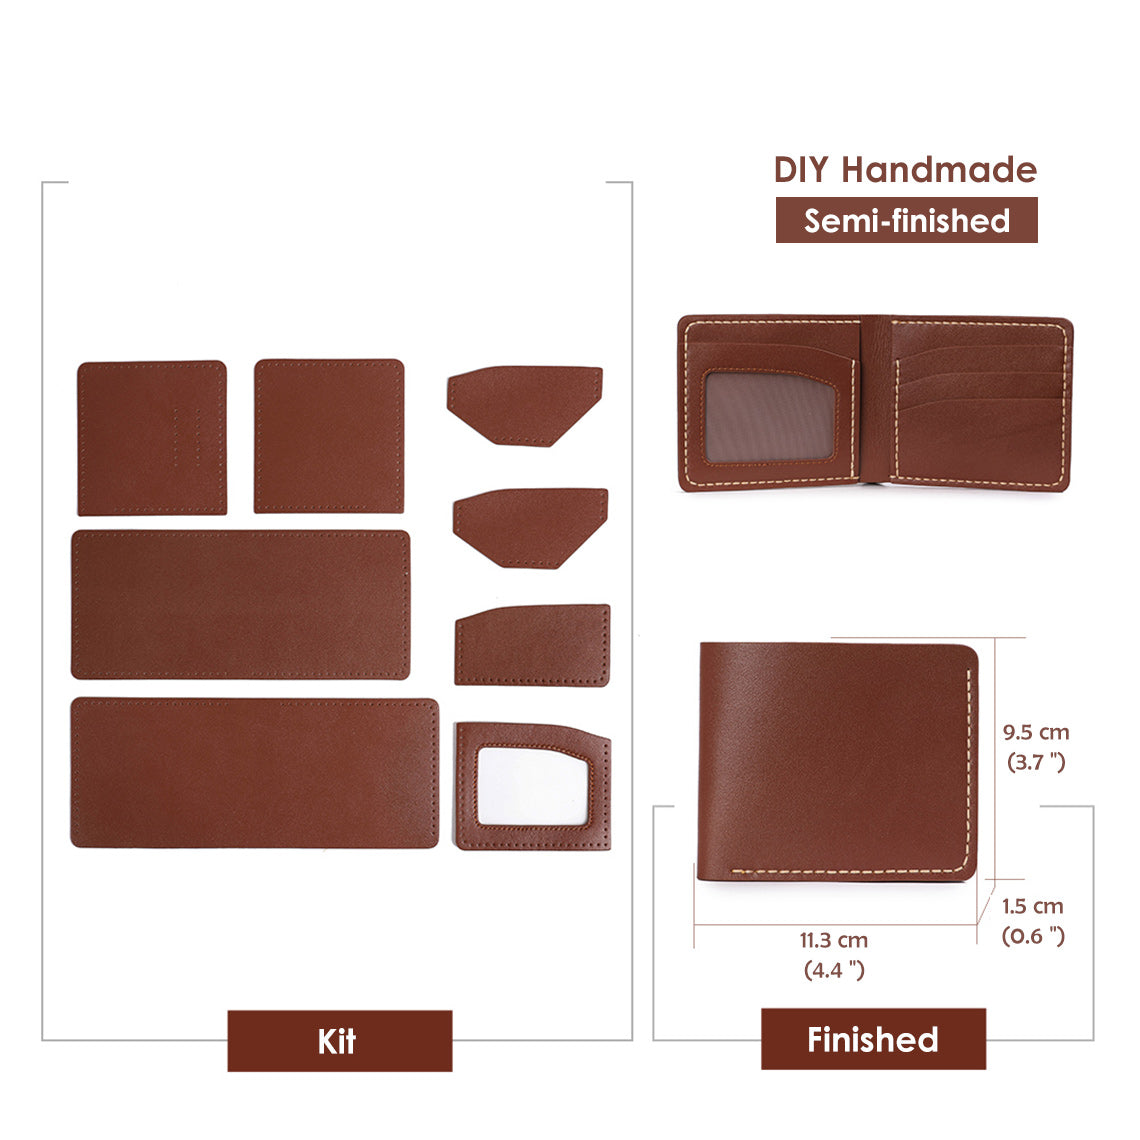 Top Grain Leather Wallet Kits - DIY Wallet for Men Bifold Trifold Trifold / Light Brown